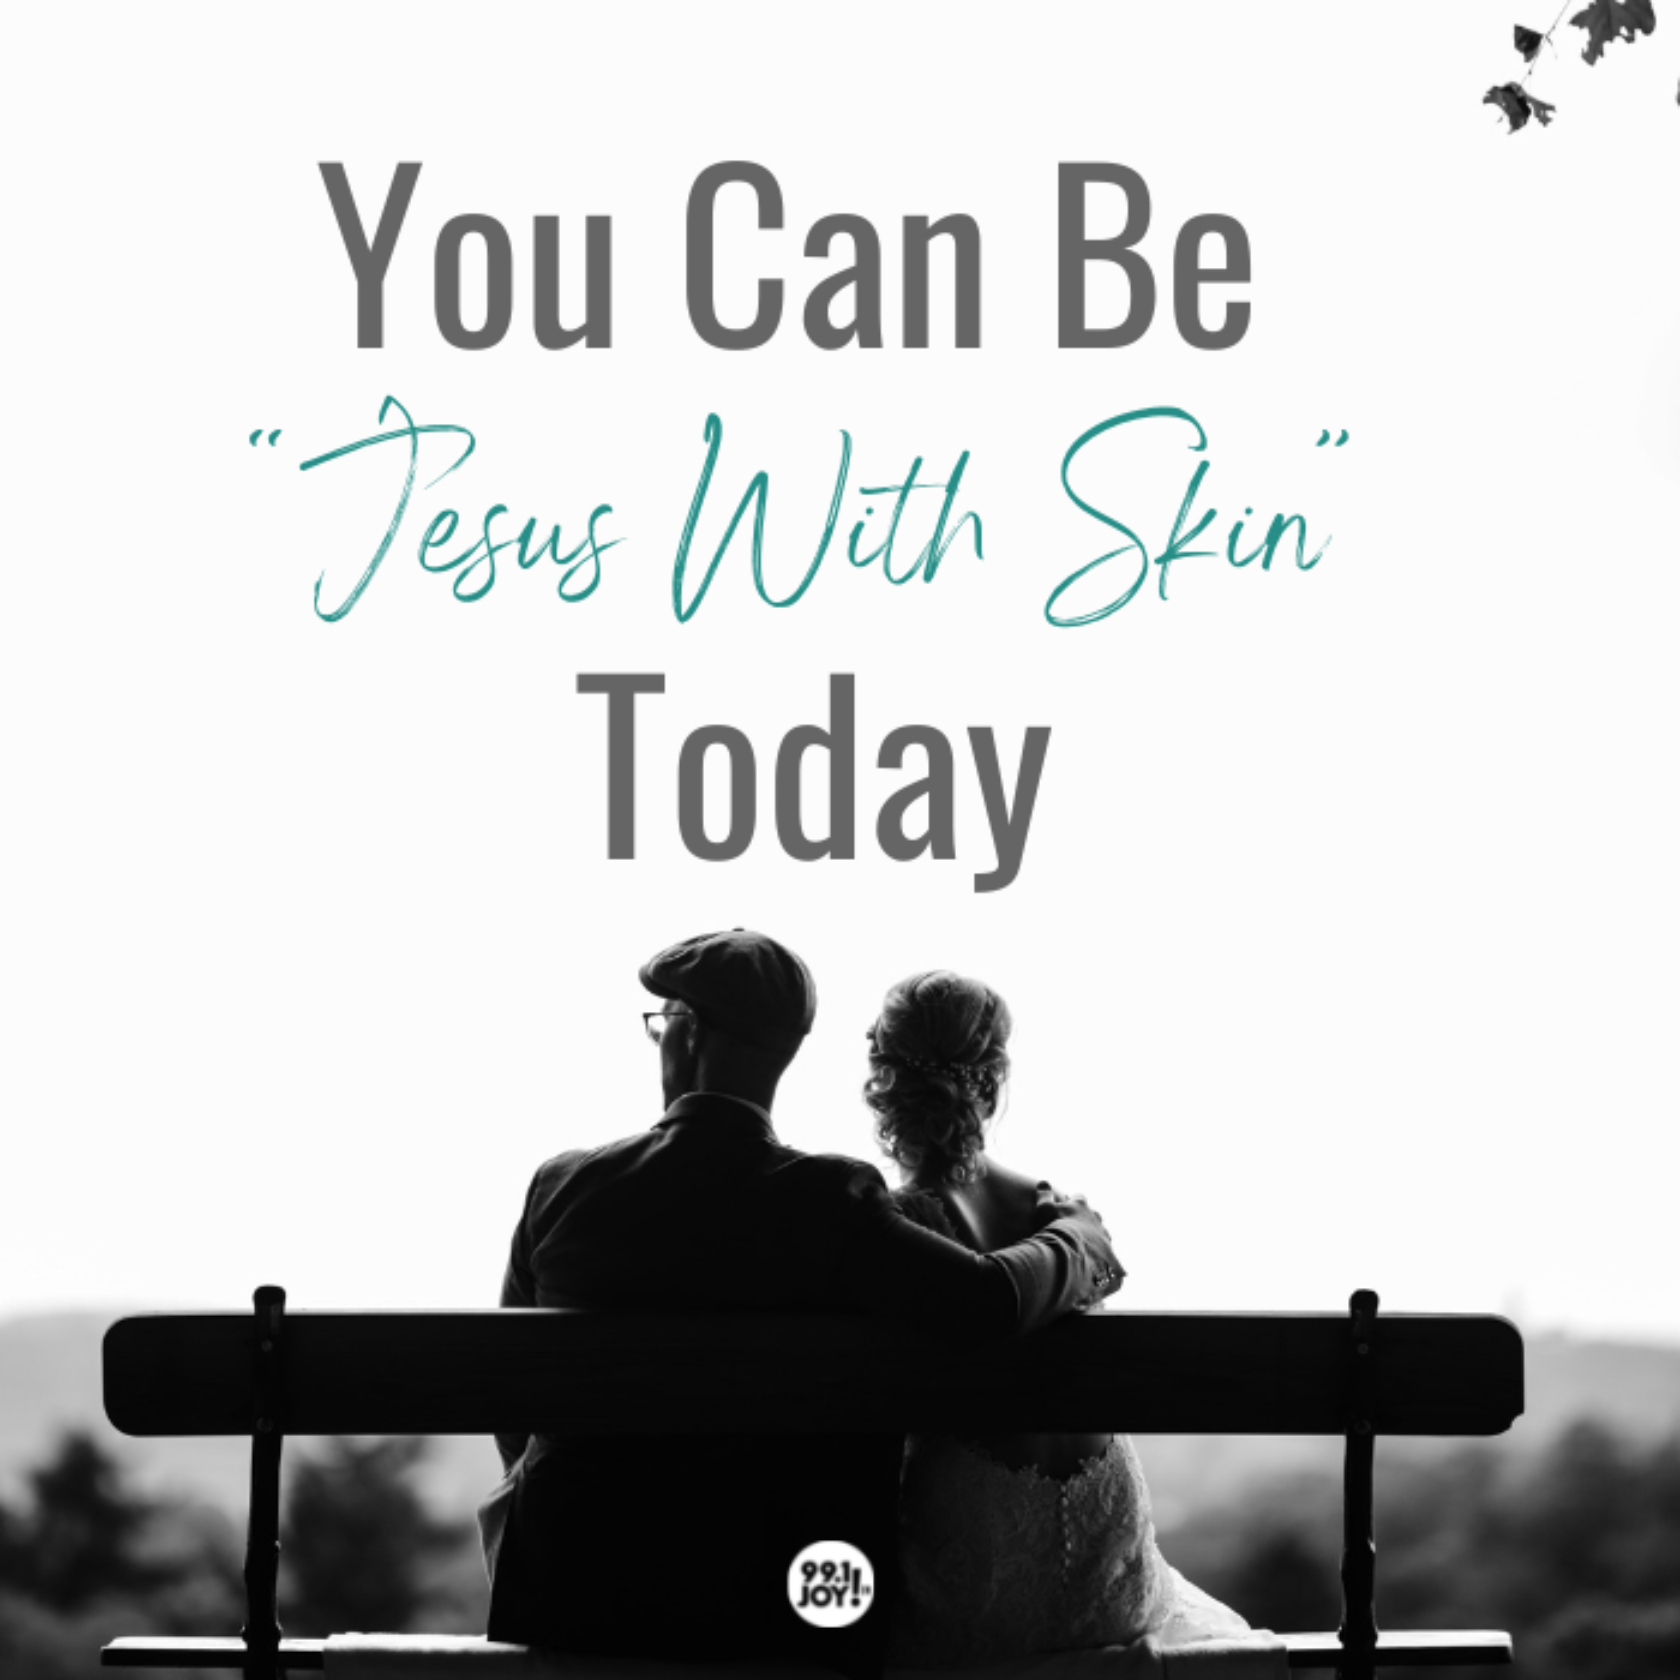 You Can Be “Jesus With Skin” Today